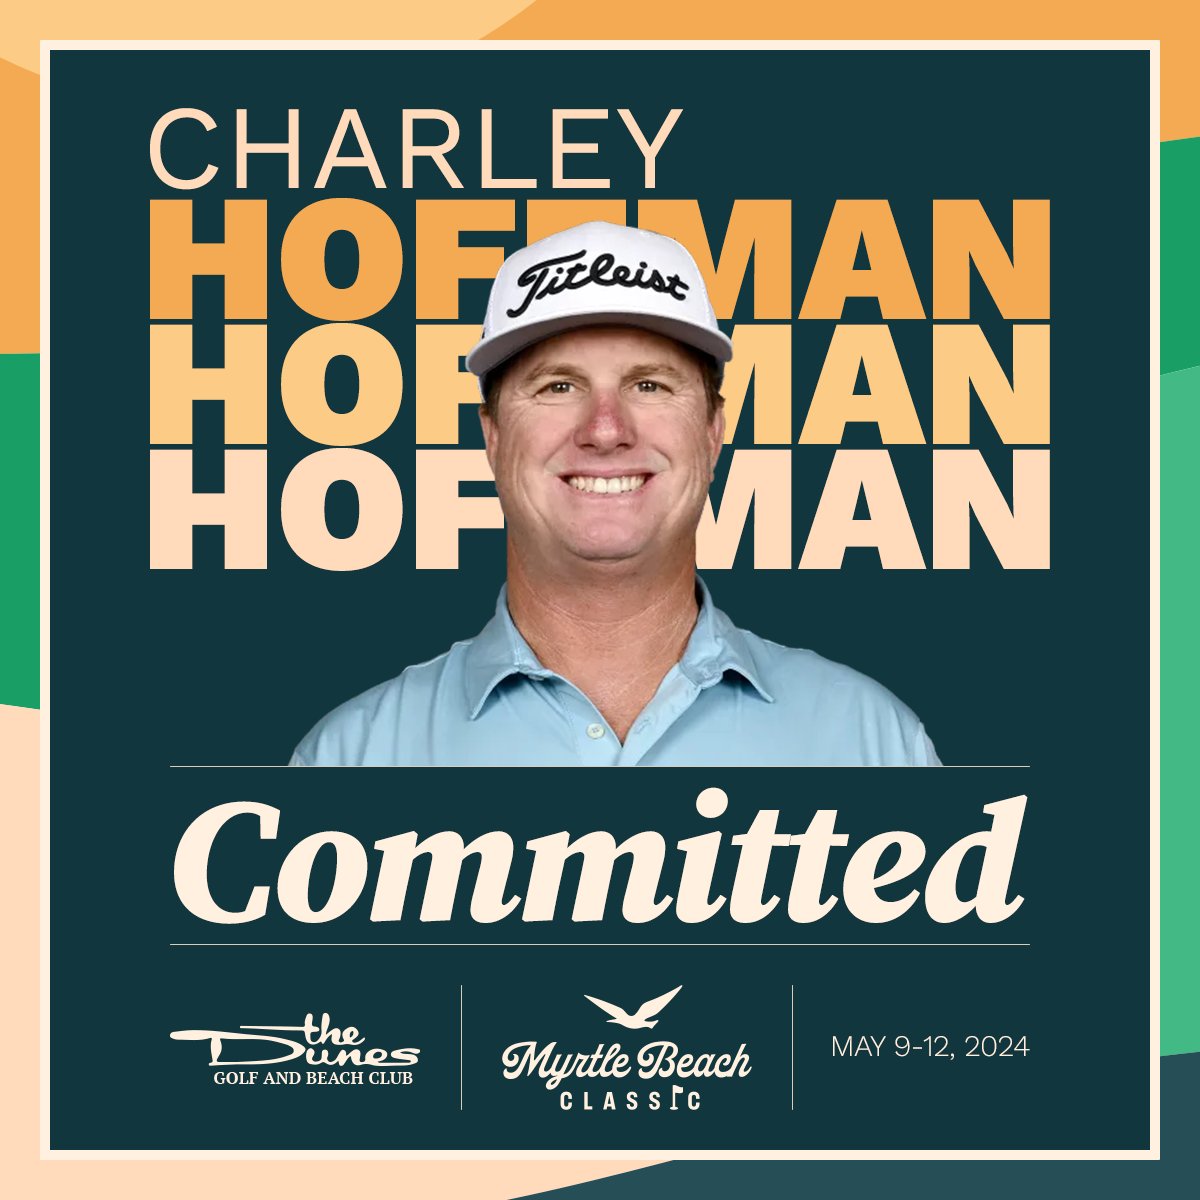 Welcome to the Myrtle Beach Classic! Cameron Champ – A 3-time winner on the PGA TOUR Daniel Berger – A 4-time winner on the PGA TOUR, 2014-15 PGA TOUR Rookie of the Year Charley Hoffman – A 4-time winner on the PGA TOUR Visit myrtlebeachclassic.com to get your tickets.